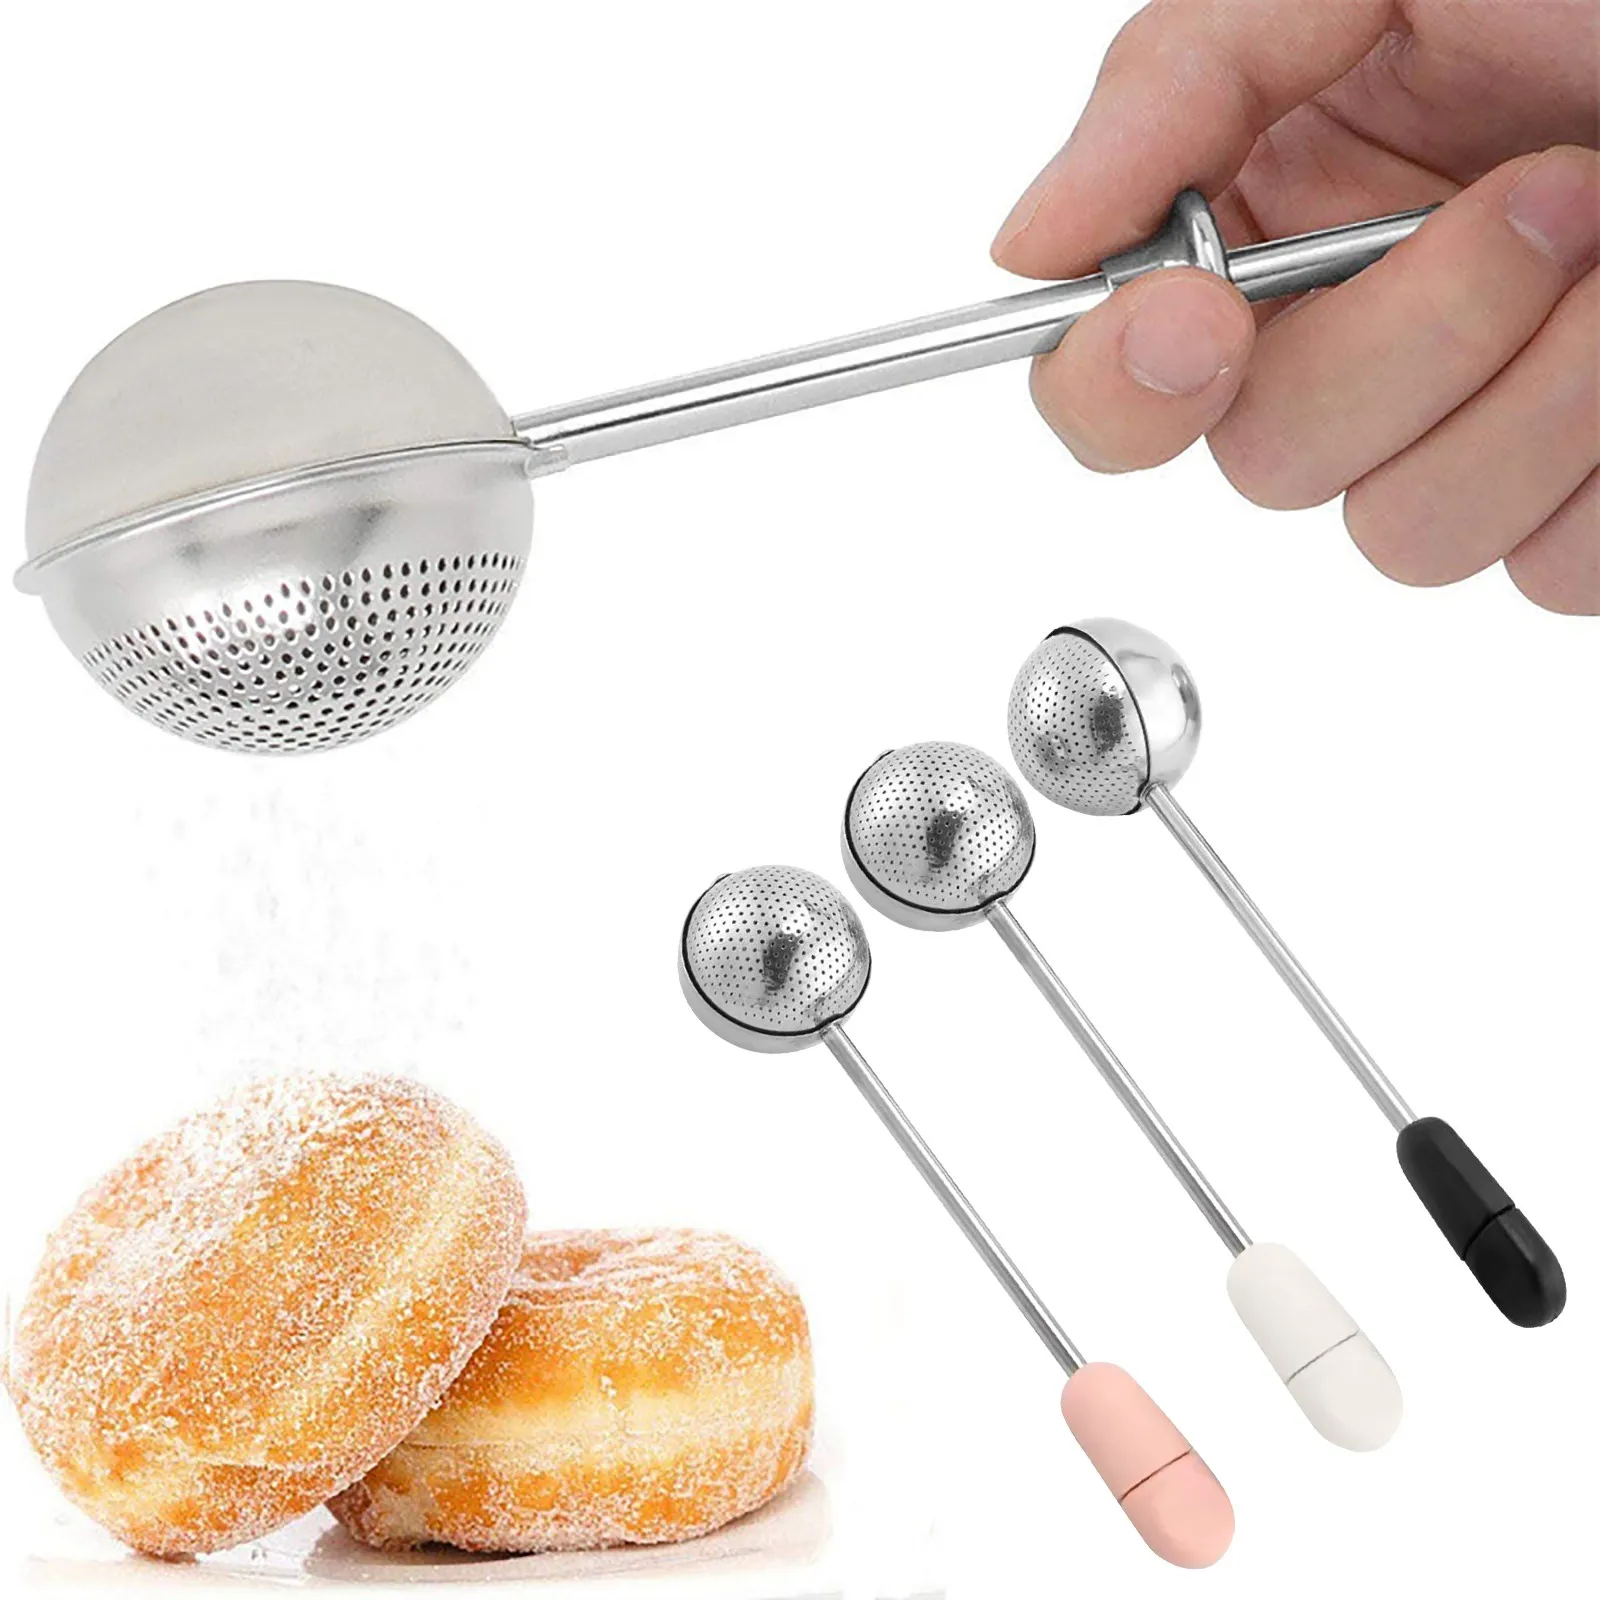 

Powder Sugar Shaker Duster Sifter Dusting Wand For Sugar Flour Spices Powdered Sugar Sifter Baking Kitchen Tools Accessories #M